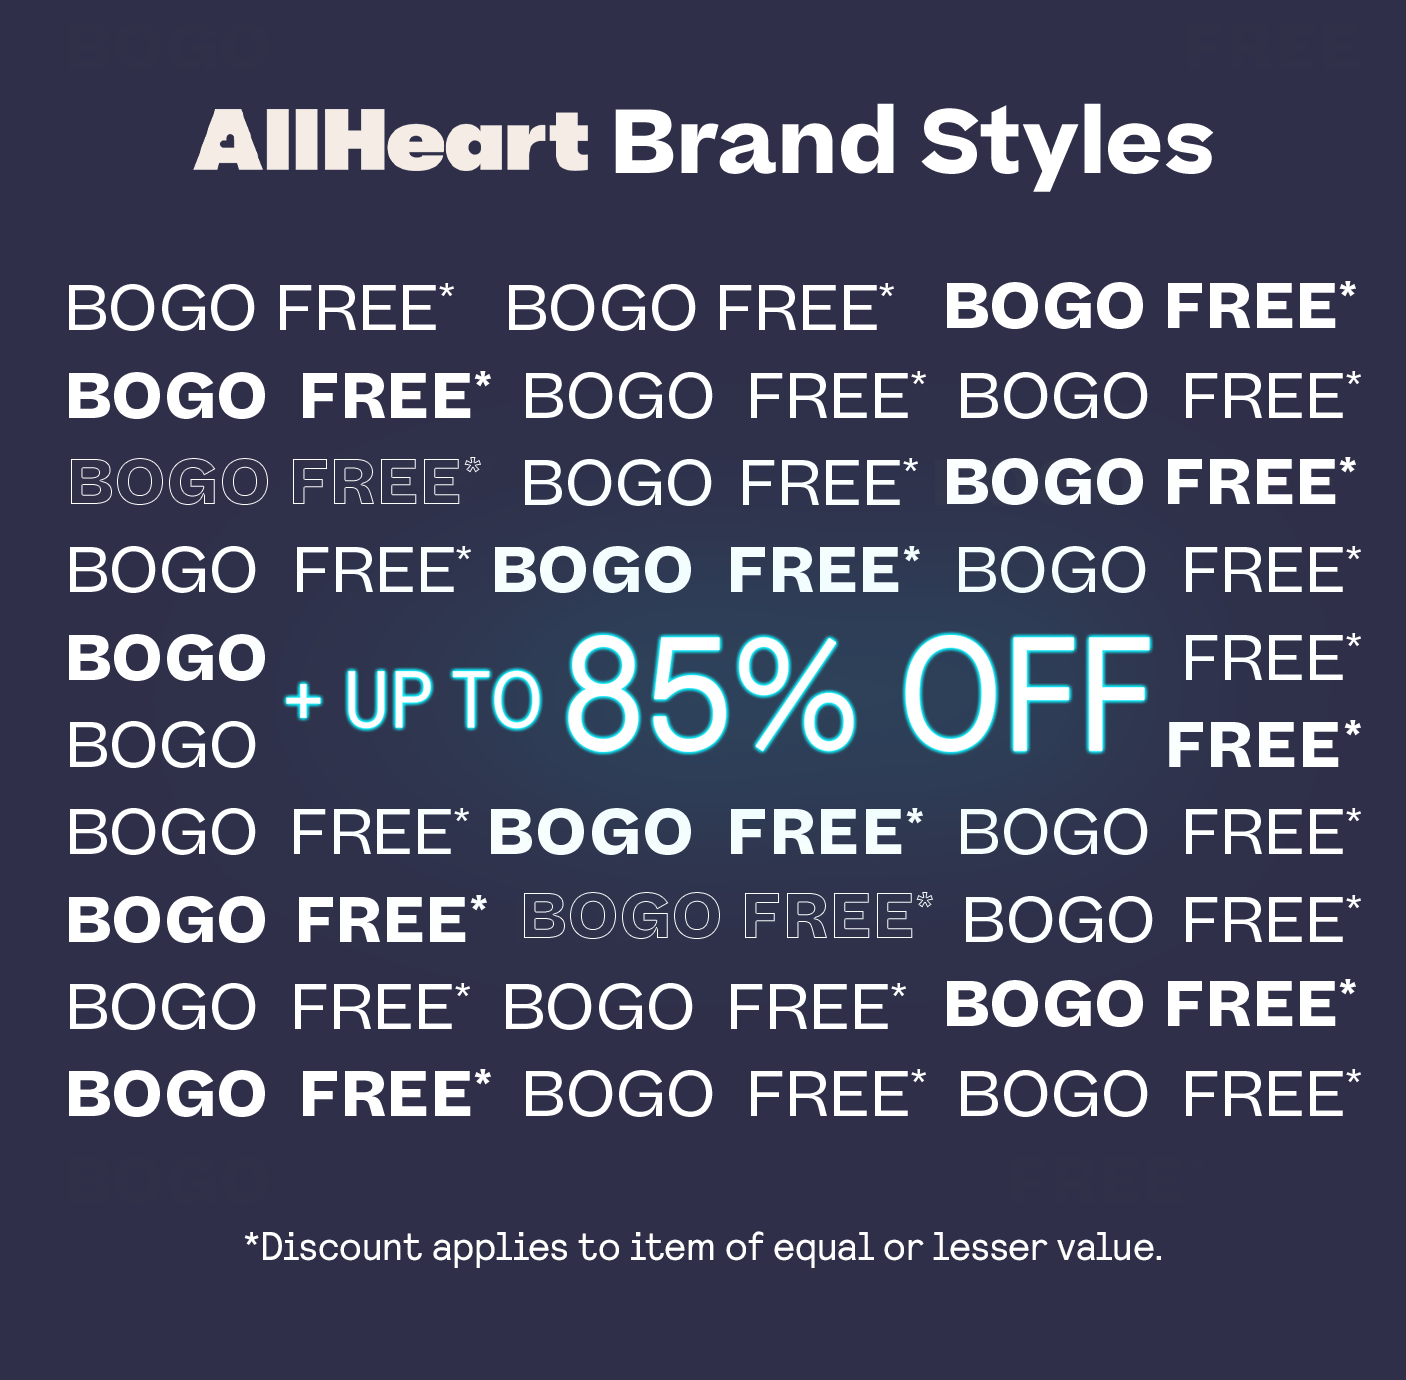 Warehouse Sale AllHeart Brand Styles Up to 85% Off + BOGO FREE* applies to items of equal or lesser value